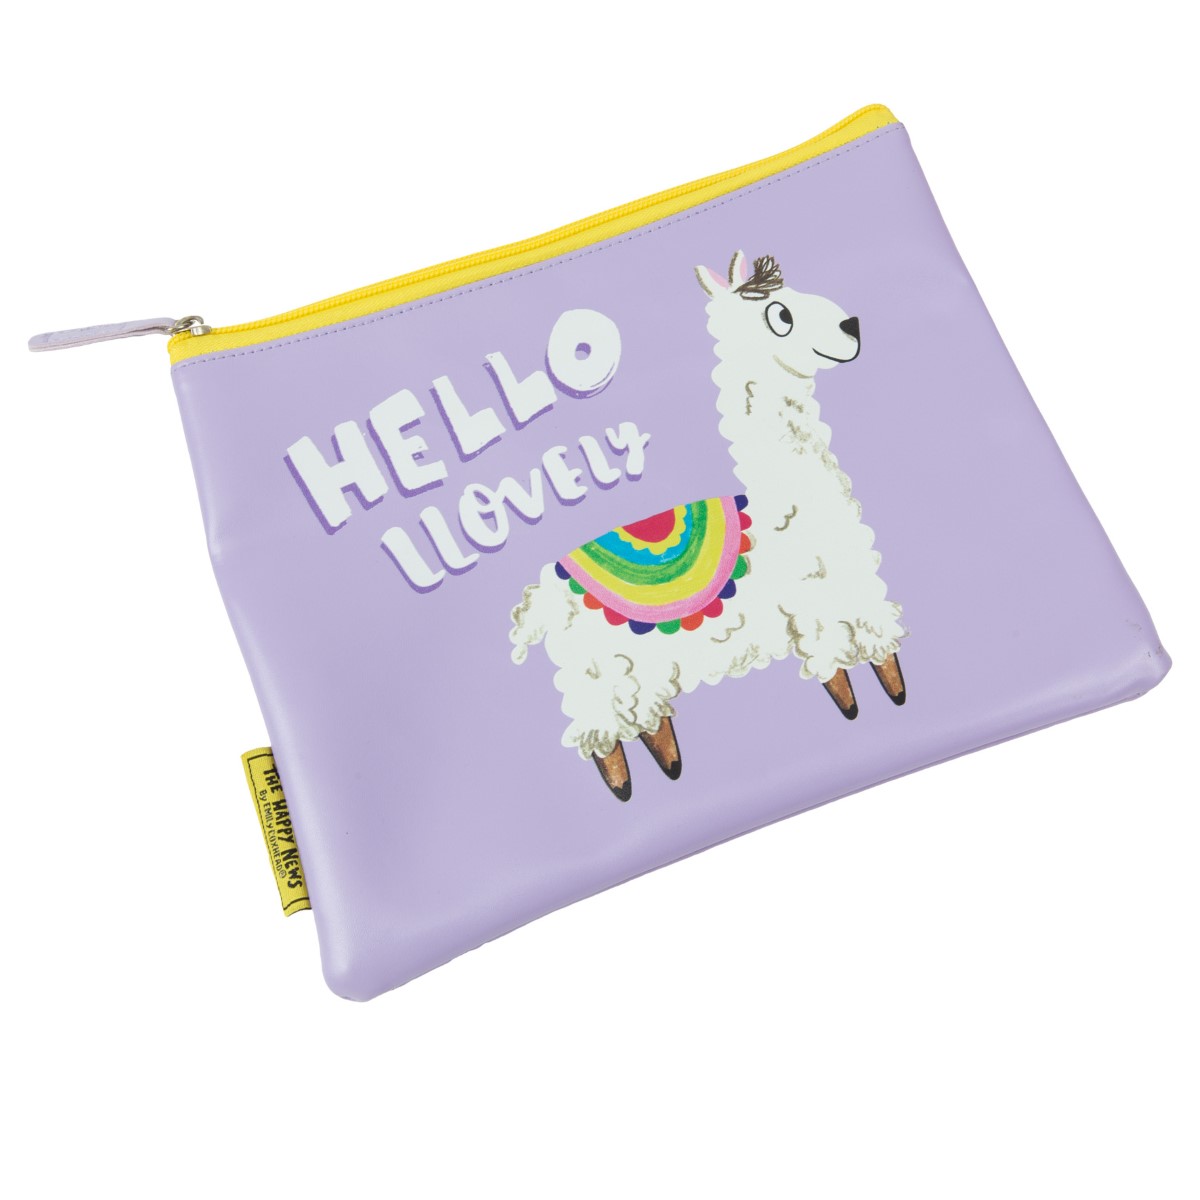 The Happy News Hello Llovely Large Pouch